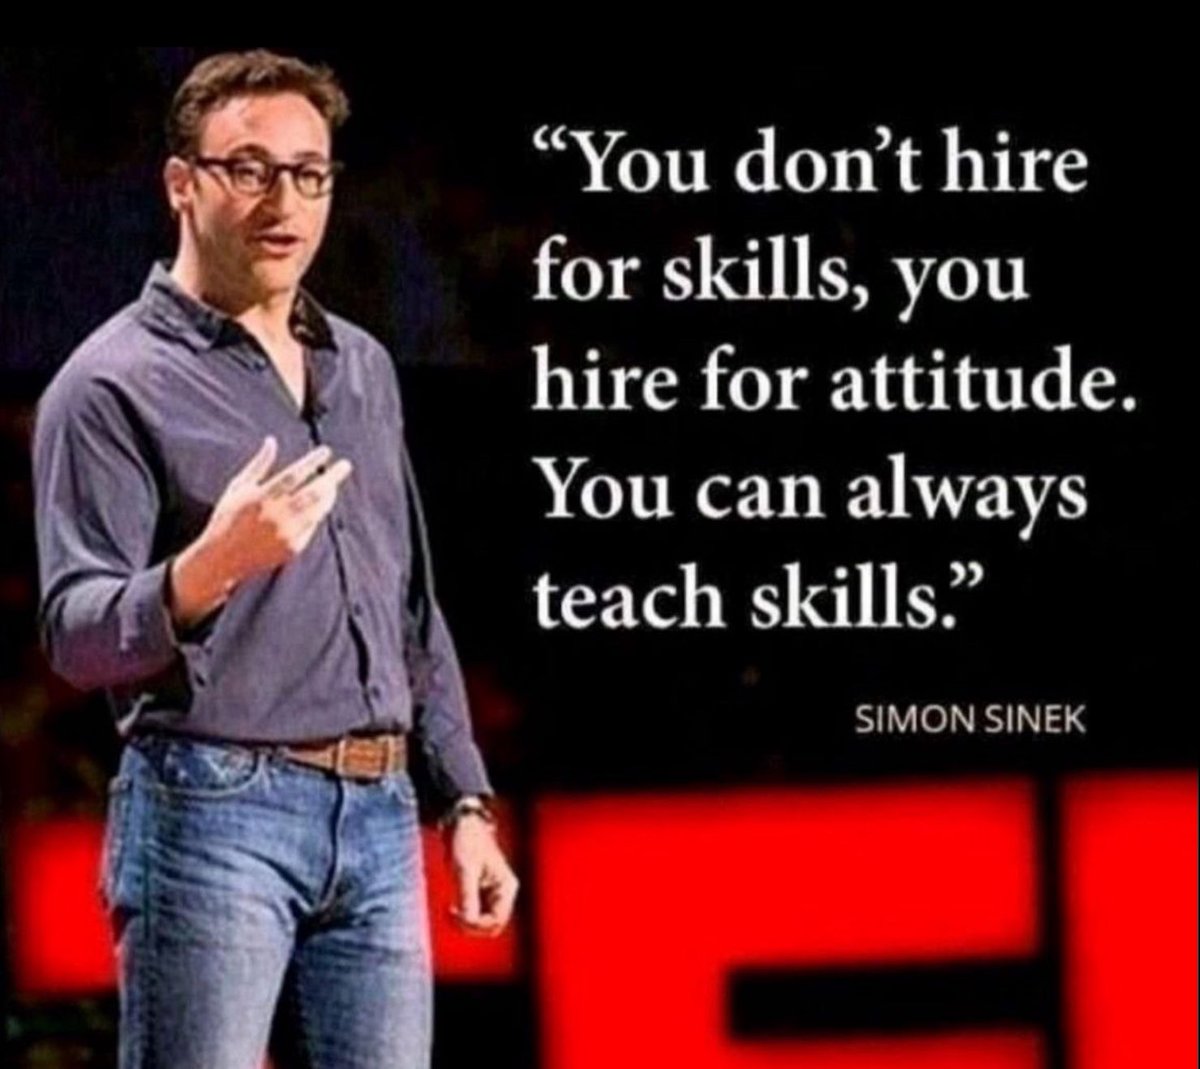 Technical skills are not as important as the ability to innovate, think outside the box, work with others, adhere to our values, and be flexible 👉 What do you think? I couldn‘t agree more #worklife #motivation #FutureofWork #Leadership #success #startup Source 🙏 Simon Sinek